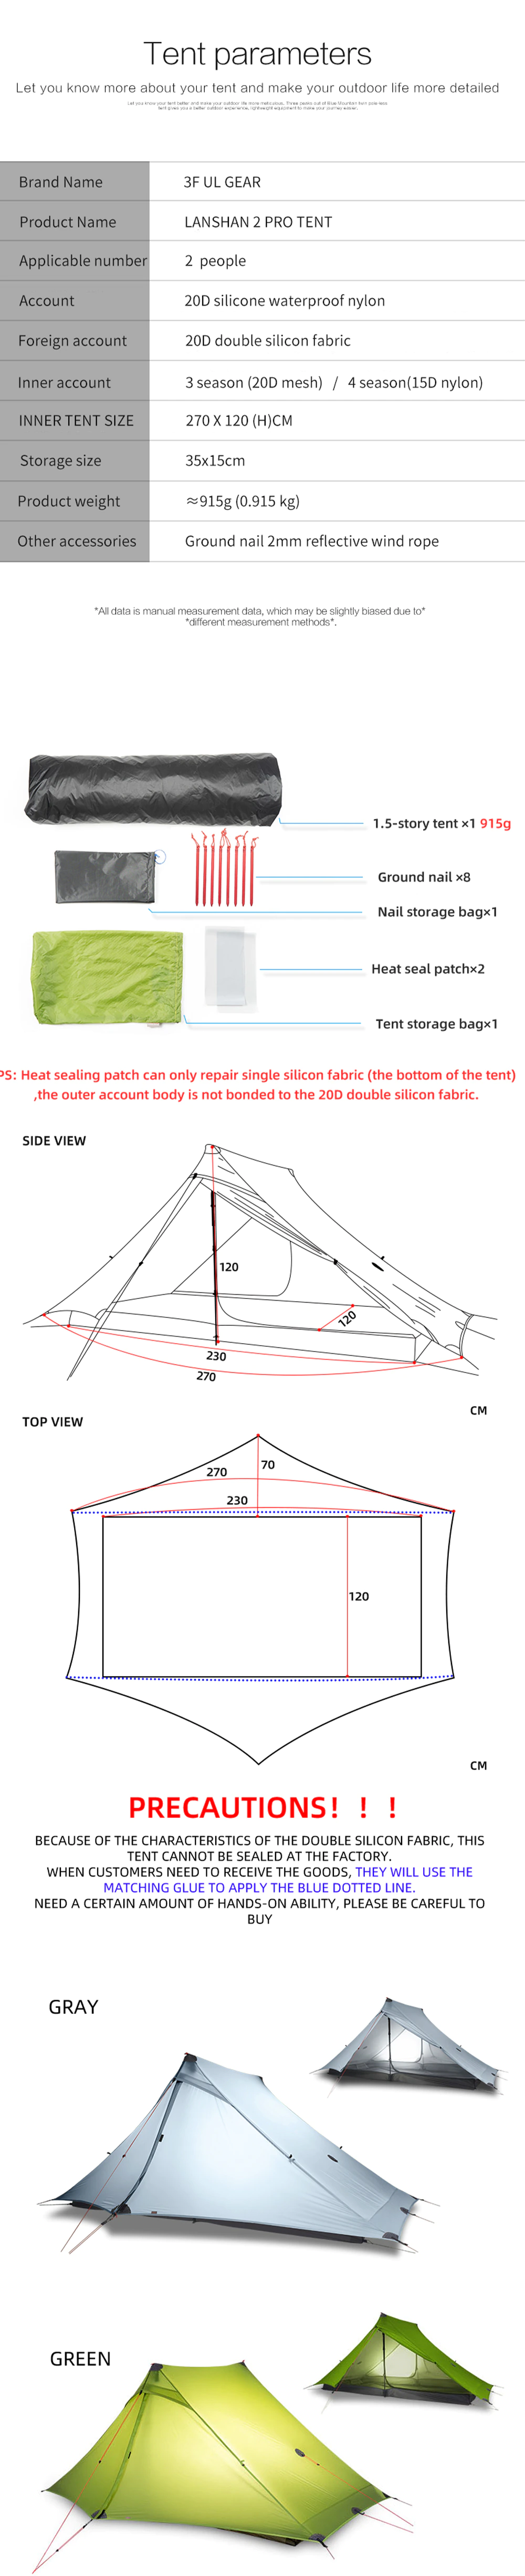 Cheap Goat Tents 3F UL GEAR LanShan 2 pro Tent 2 Person Outdoor Ultralight Camping Tent 3 Season Professional 20D Nylon Both Sides Silicon Tent Tents 